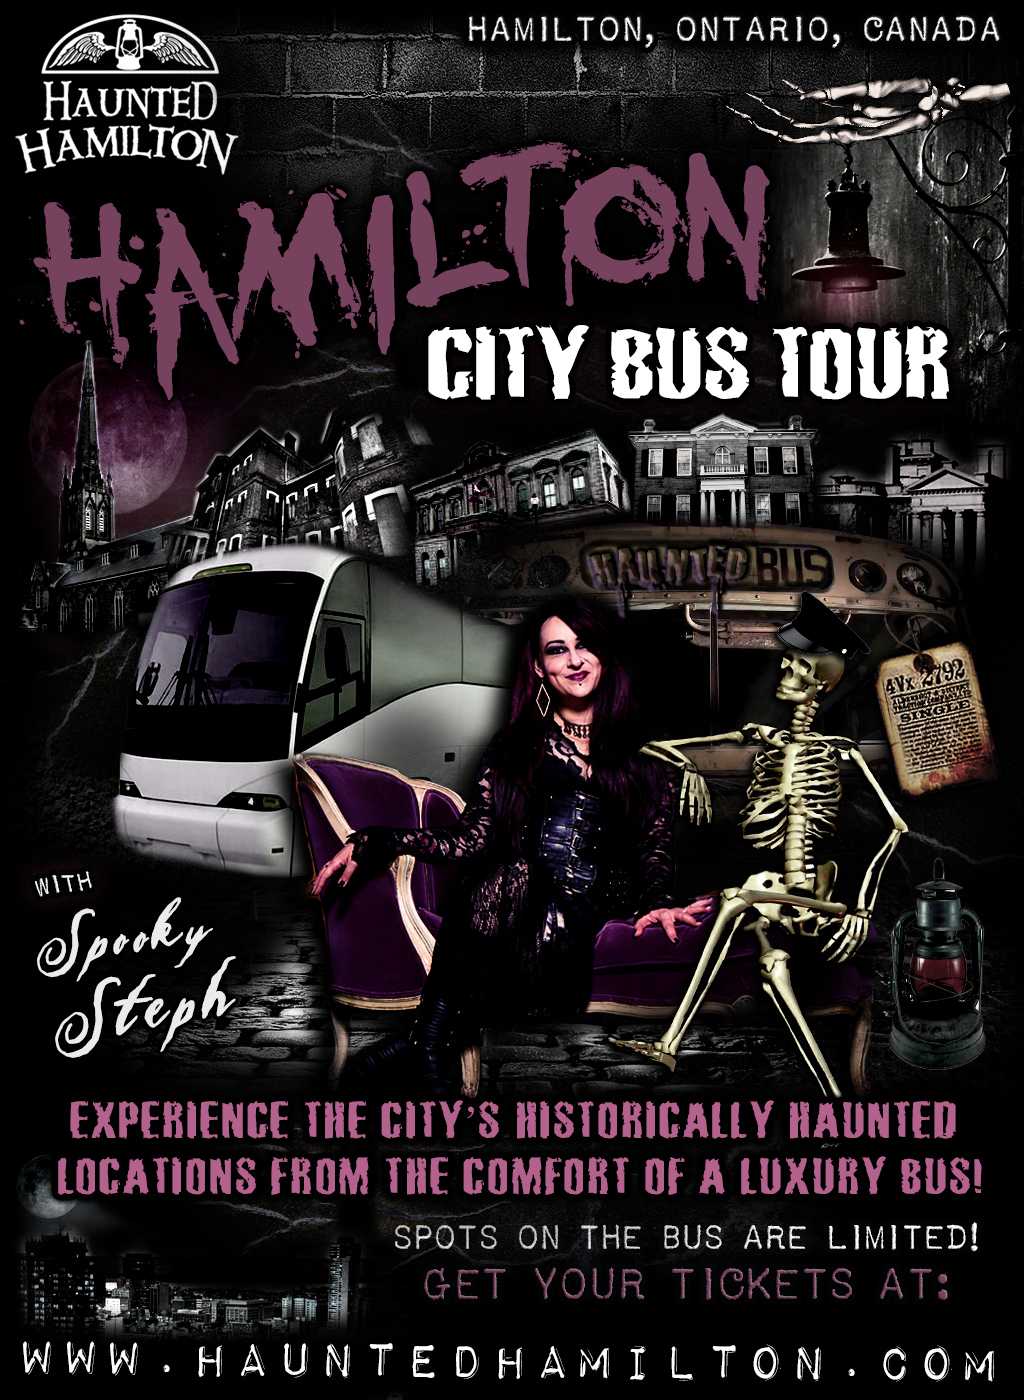 HAUNTED HAMILTON CITY BUS TOUR | Experience a Tour of Hamilton's Historically Haunted Locations from the Comfort of a Luxury Chartered Bus! Hosted by Spooky Steph, Founder/Owner of Haunted Hamilton Since 1999! | Hamilton, Ontario, Canada